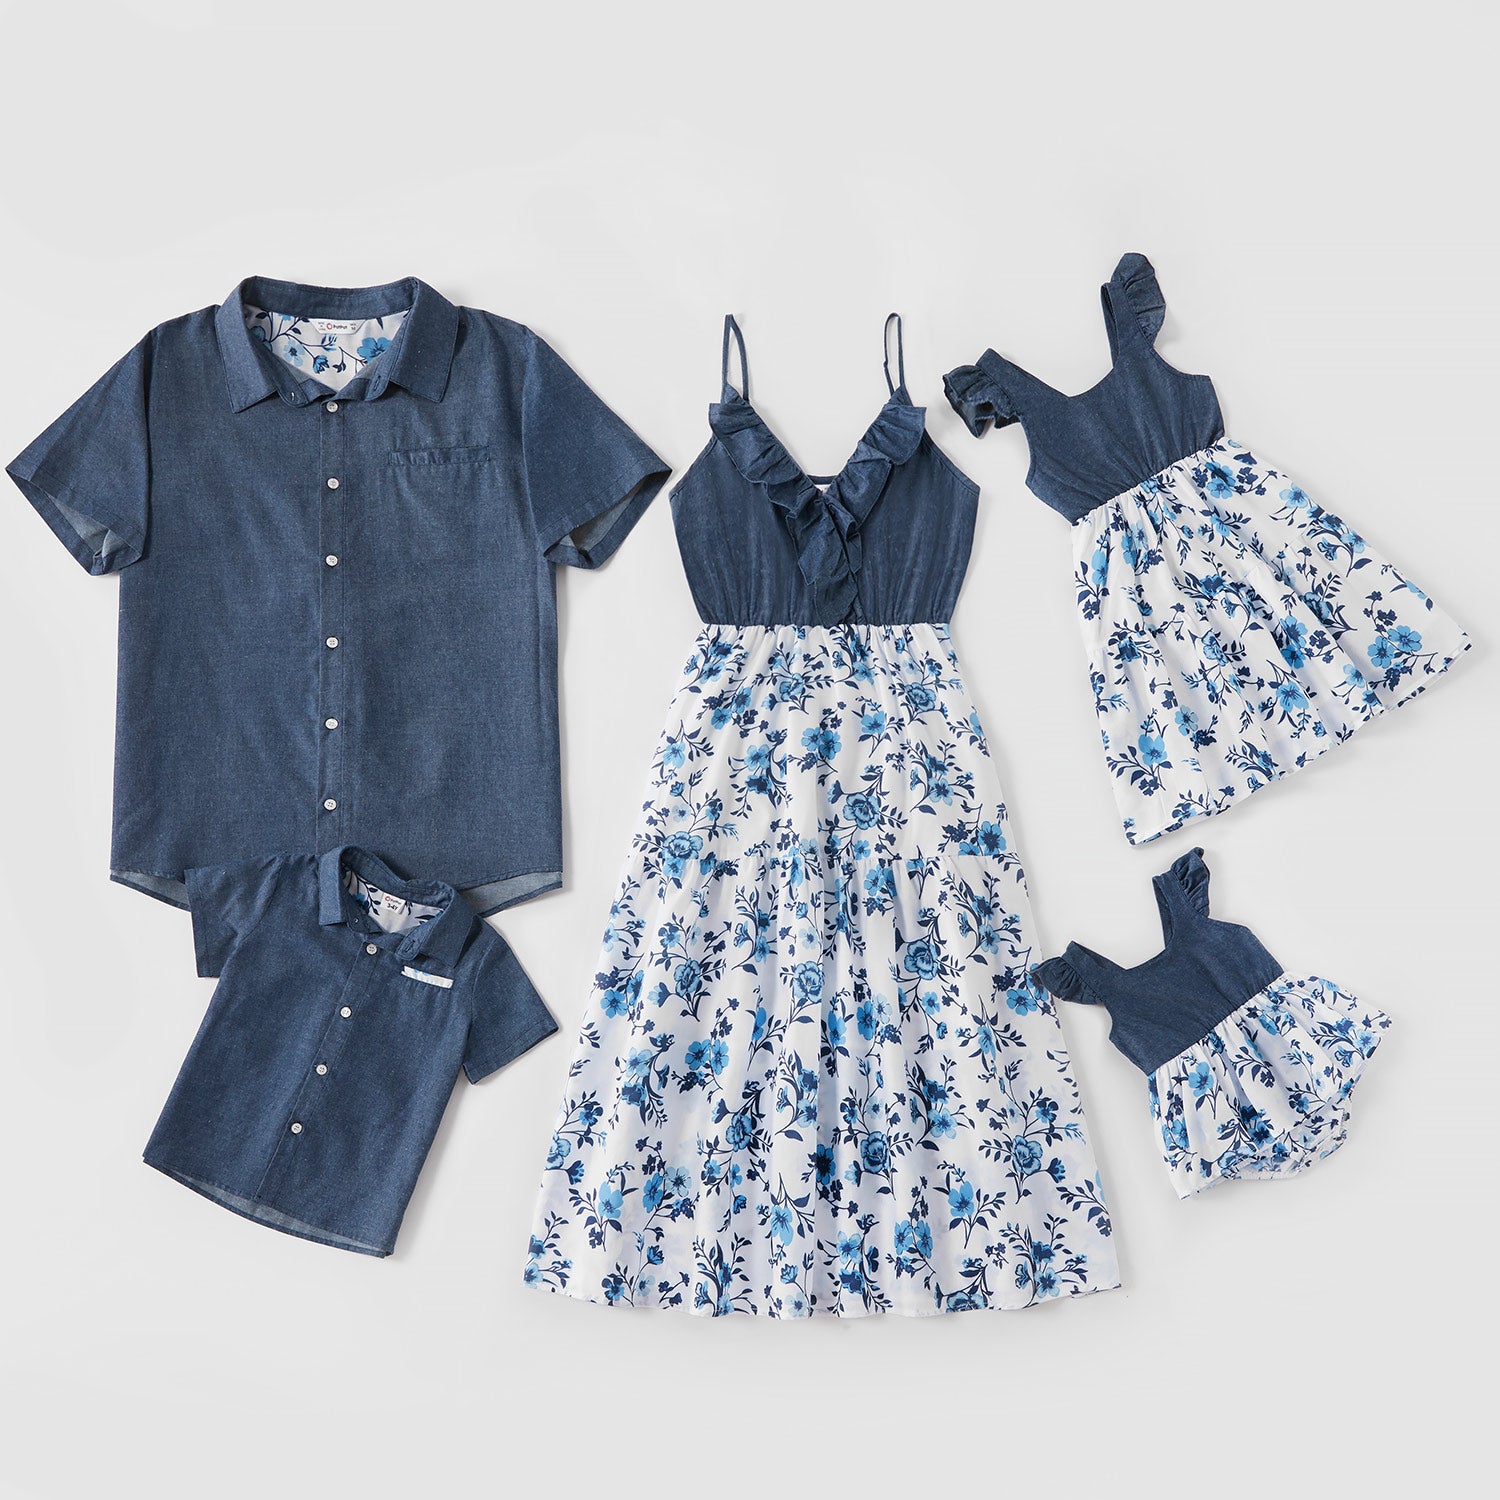 Mosaic Cotton Family Matching Floral Flounce Tank Dresses and Denim Tops